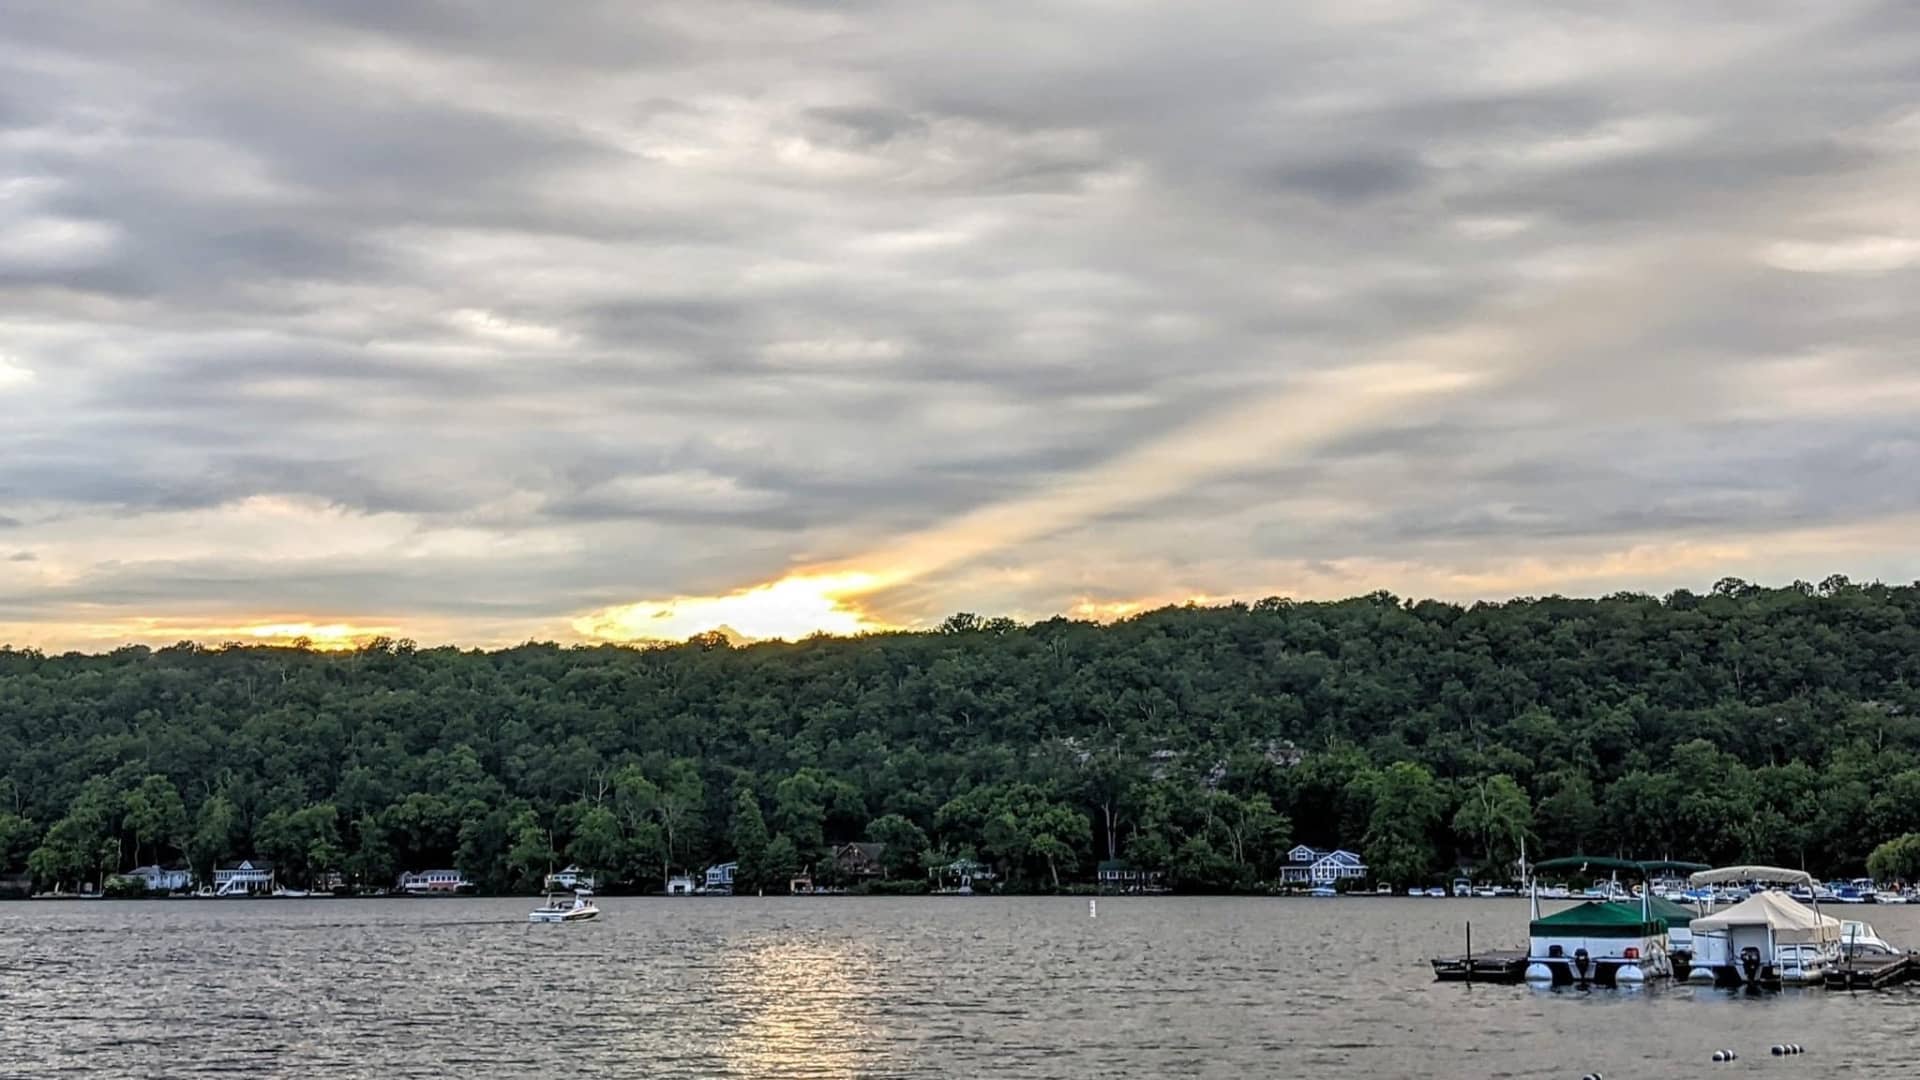 The Highlands Glacial Lakes Initiative launched a mission to remove European Water Milfoil from Green Pond Lake in New Jersey to make it safe for native species – and recreation.